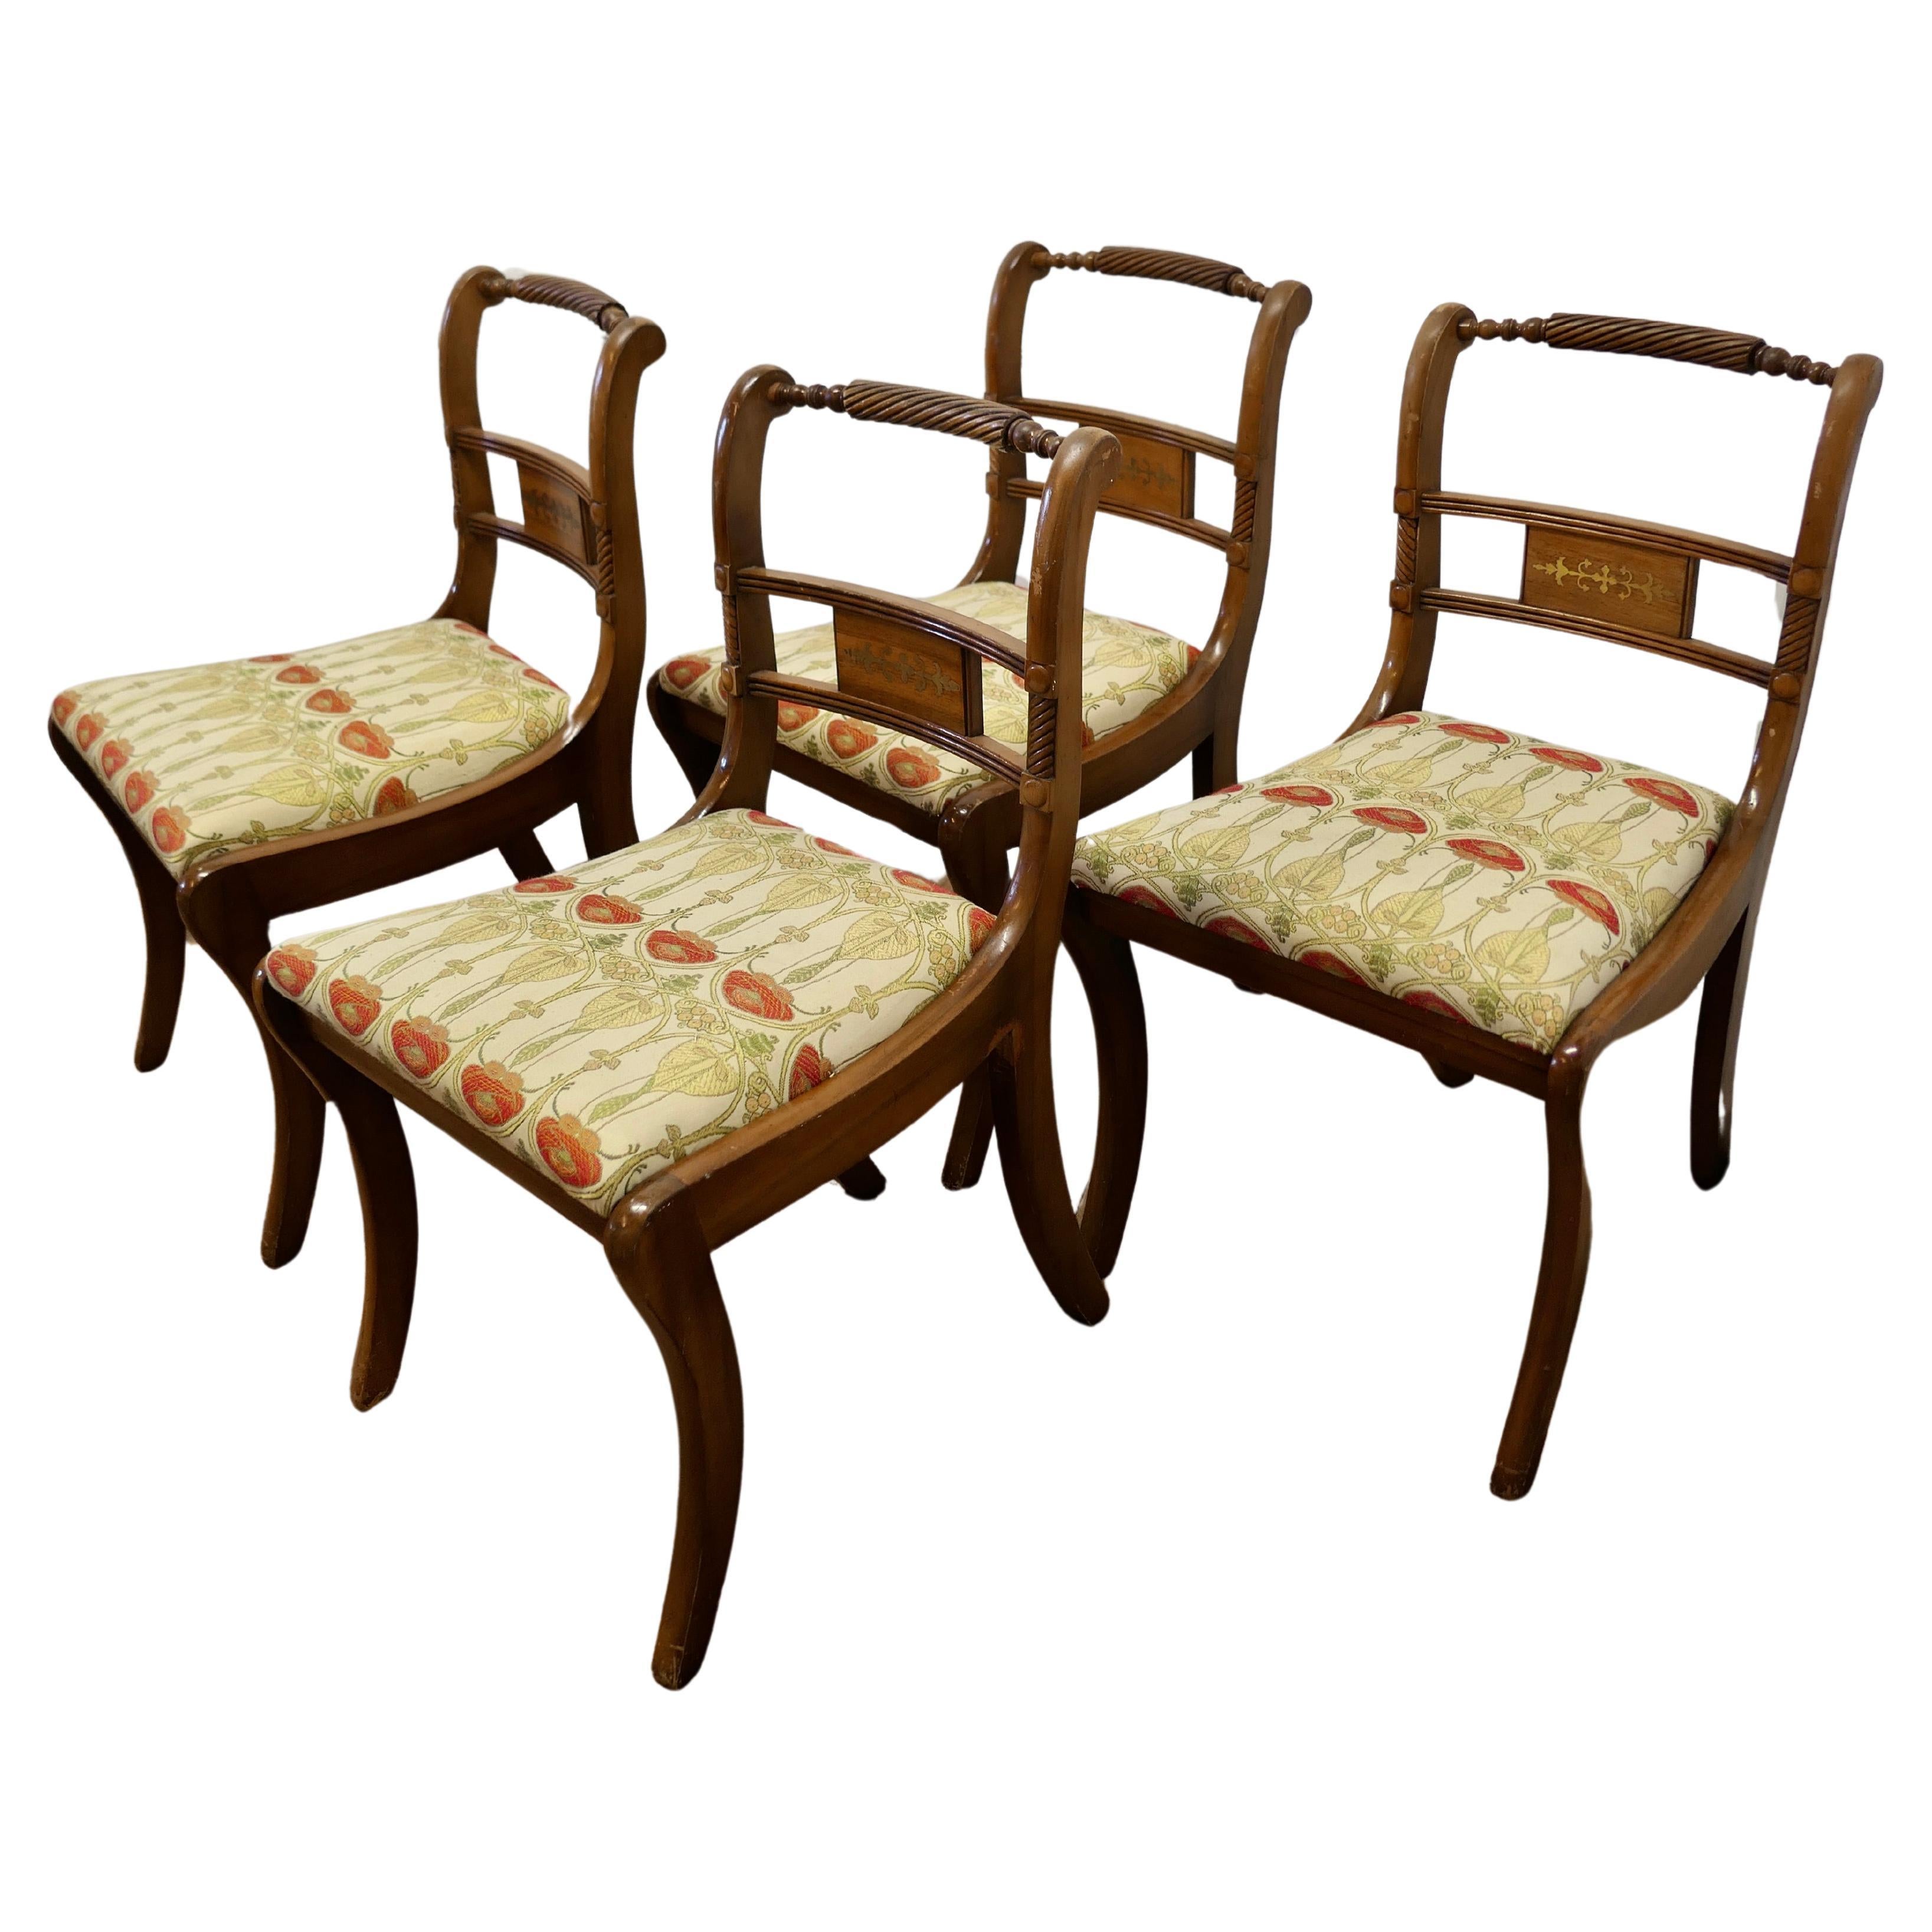 Set of 4 Art Nouveau Walnut Dining Chairs  An unusual set of chairs  For Sale